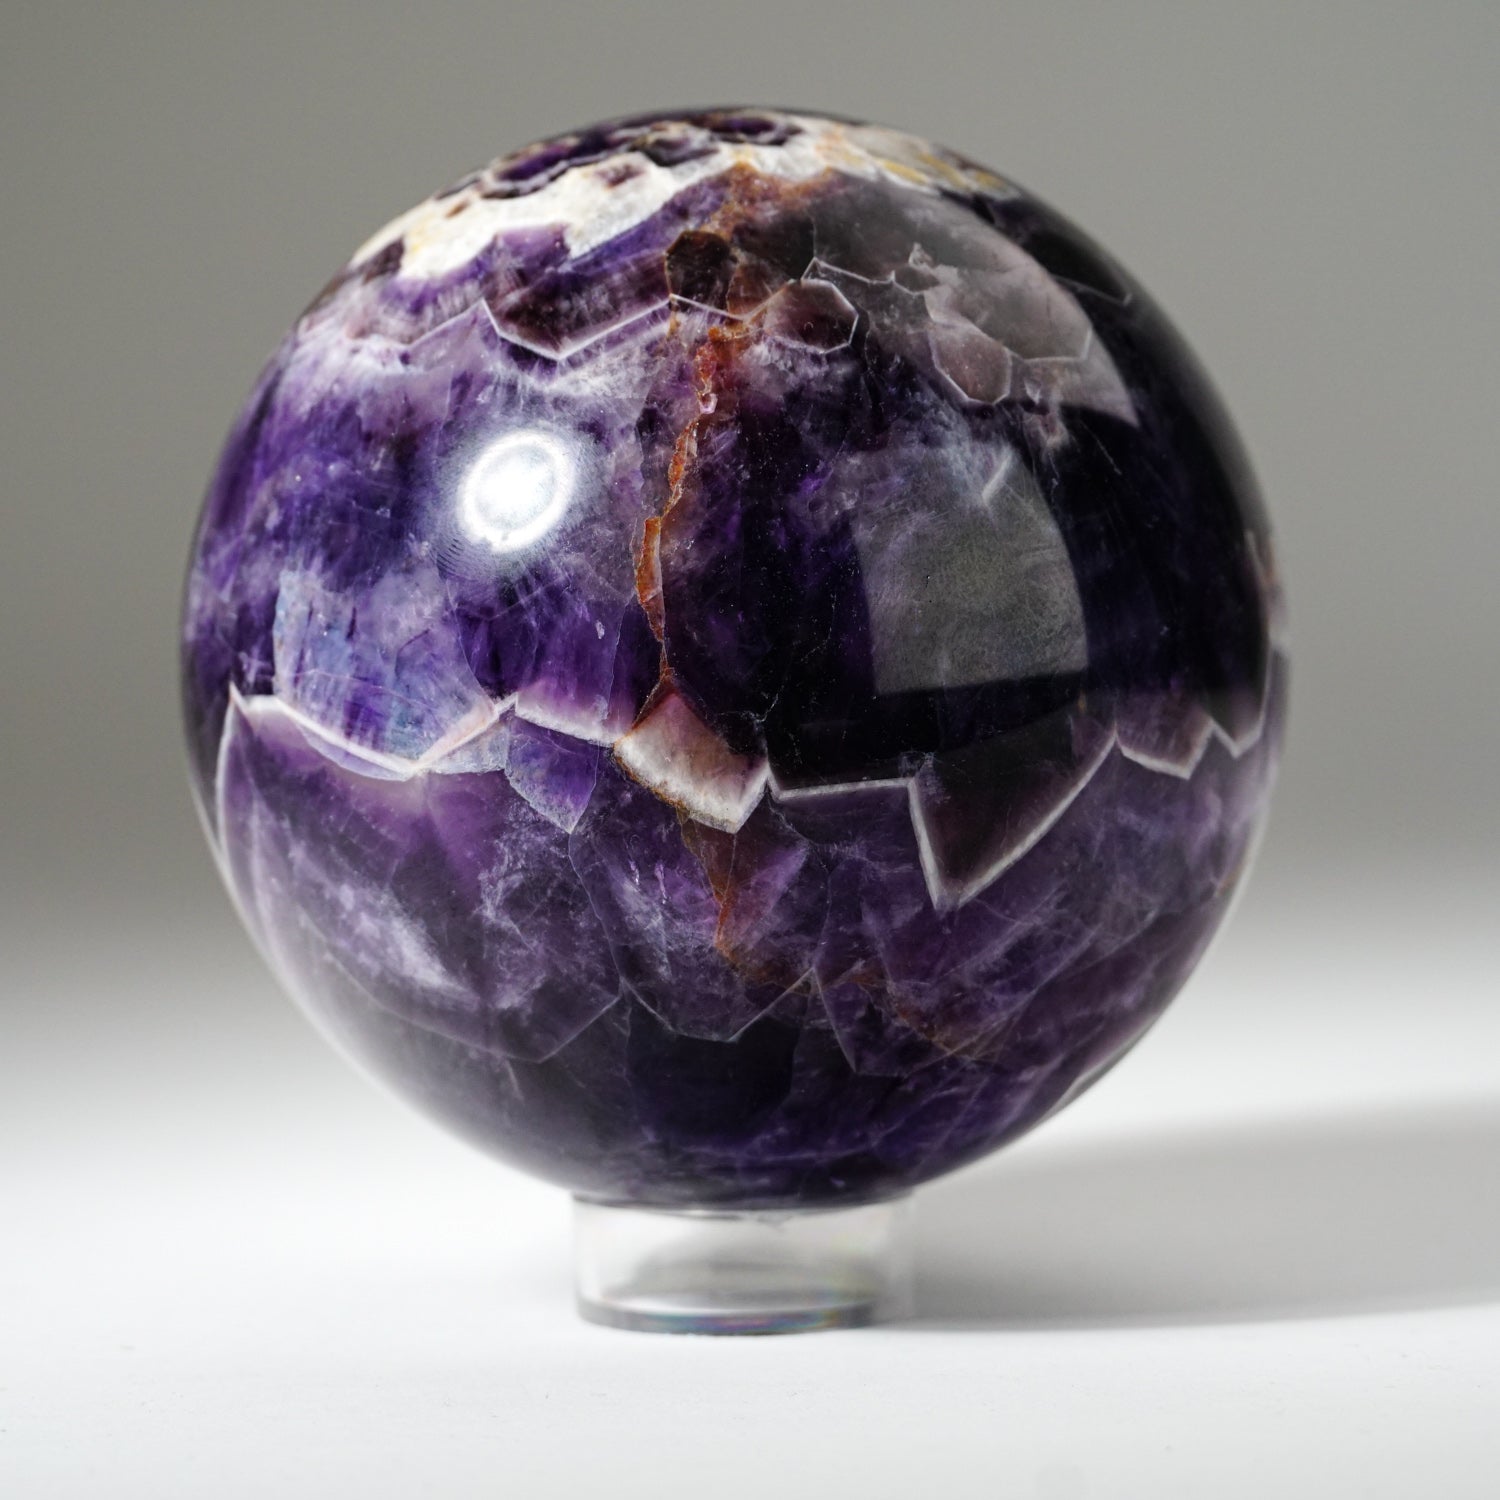 Polished Chevron Amethyst Sphere from Brazil (4", 3.2 lbs)